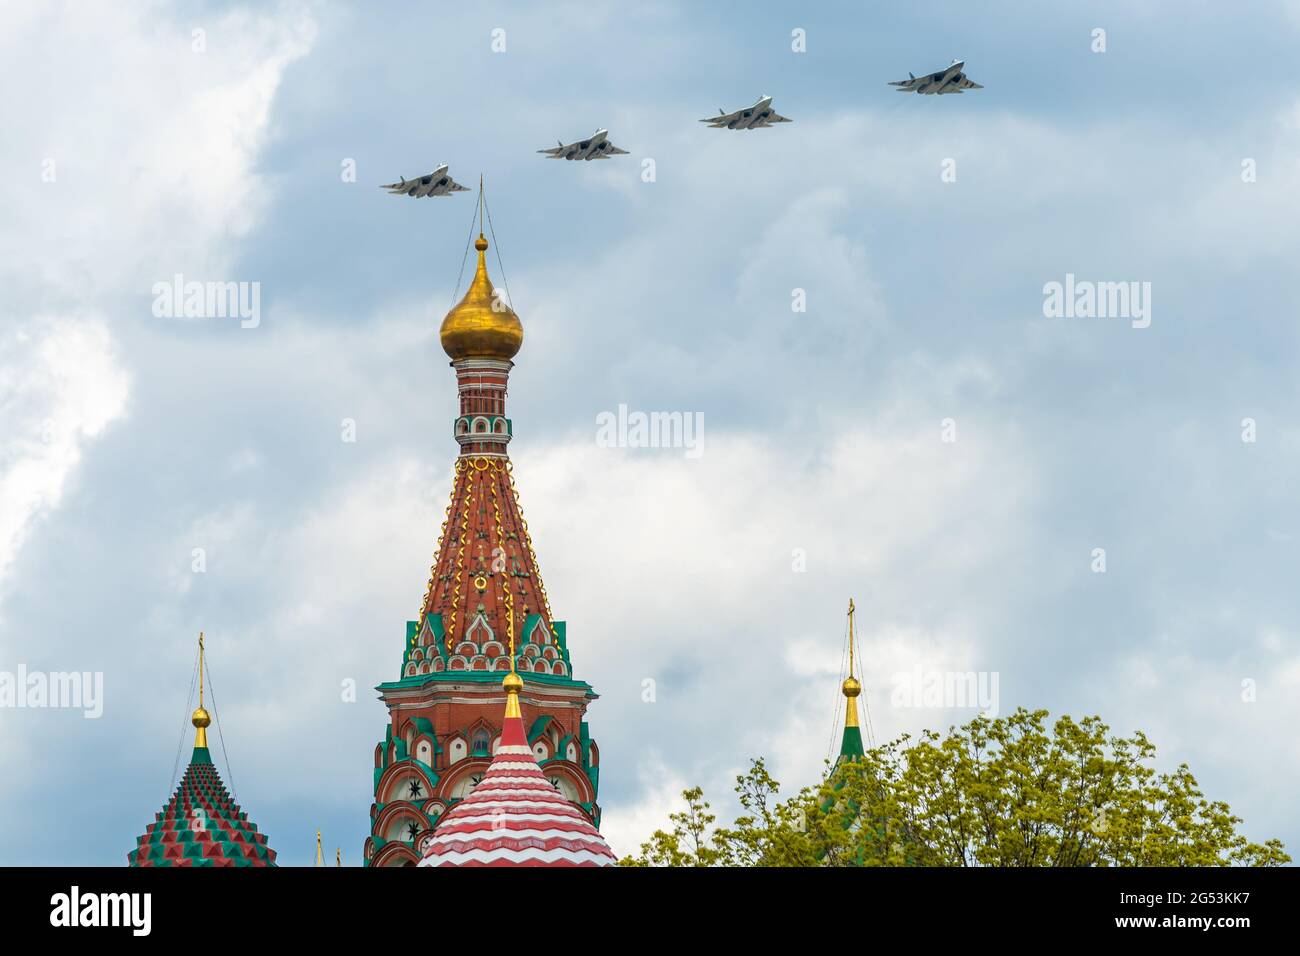 May 7, 2021, Moscow, Russia. Russian fifth-generation Su-57 multi-role fighters over Red Square in Moscow. Stock Photo